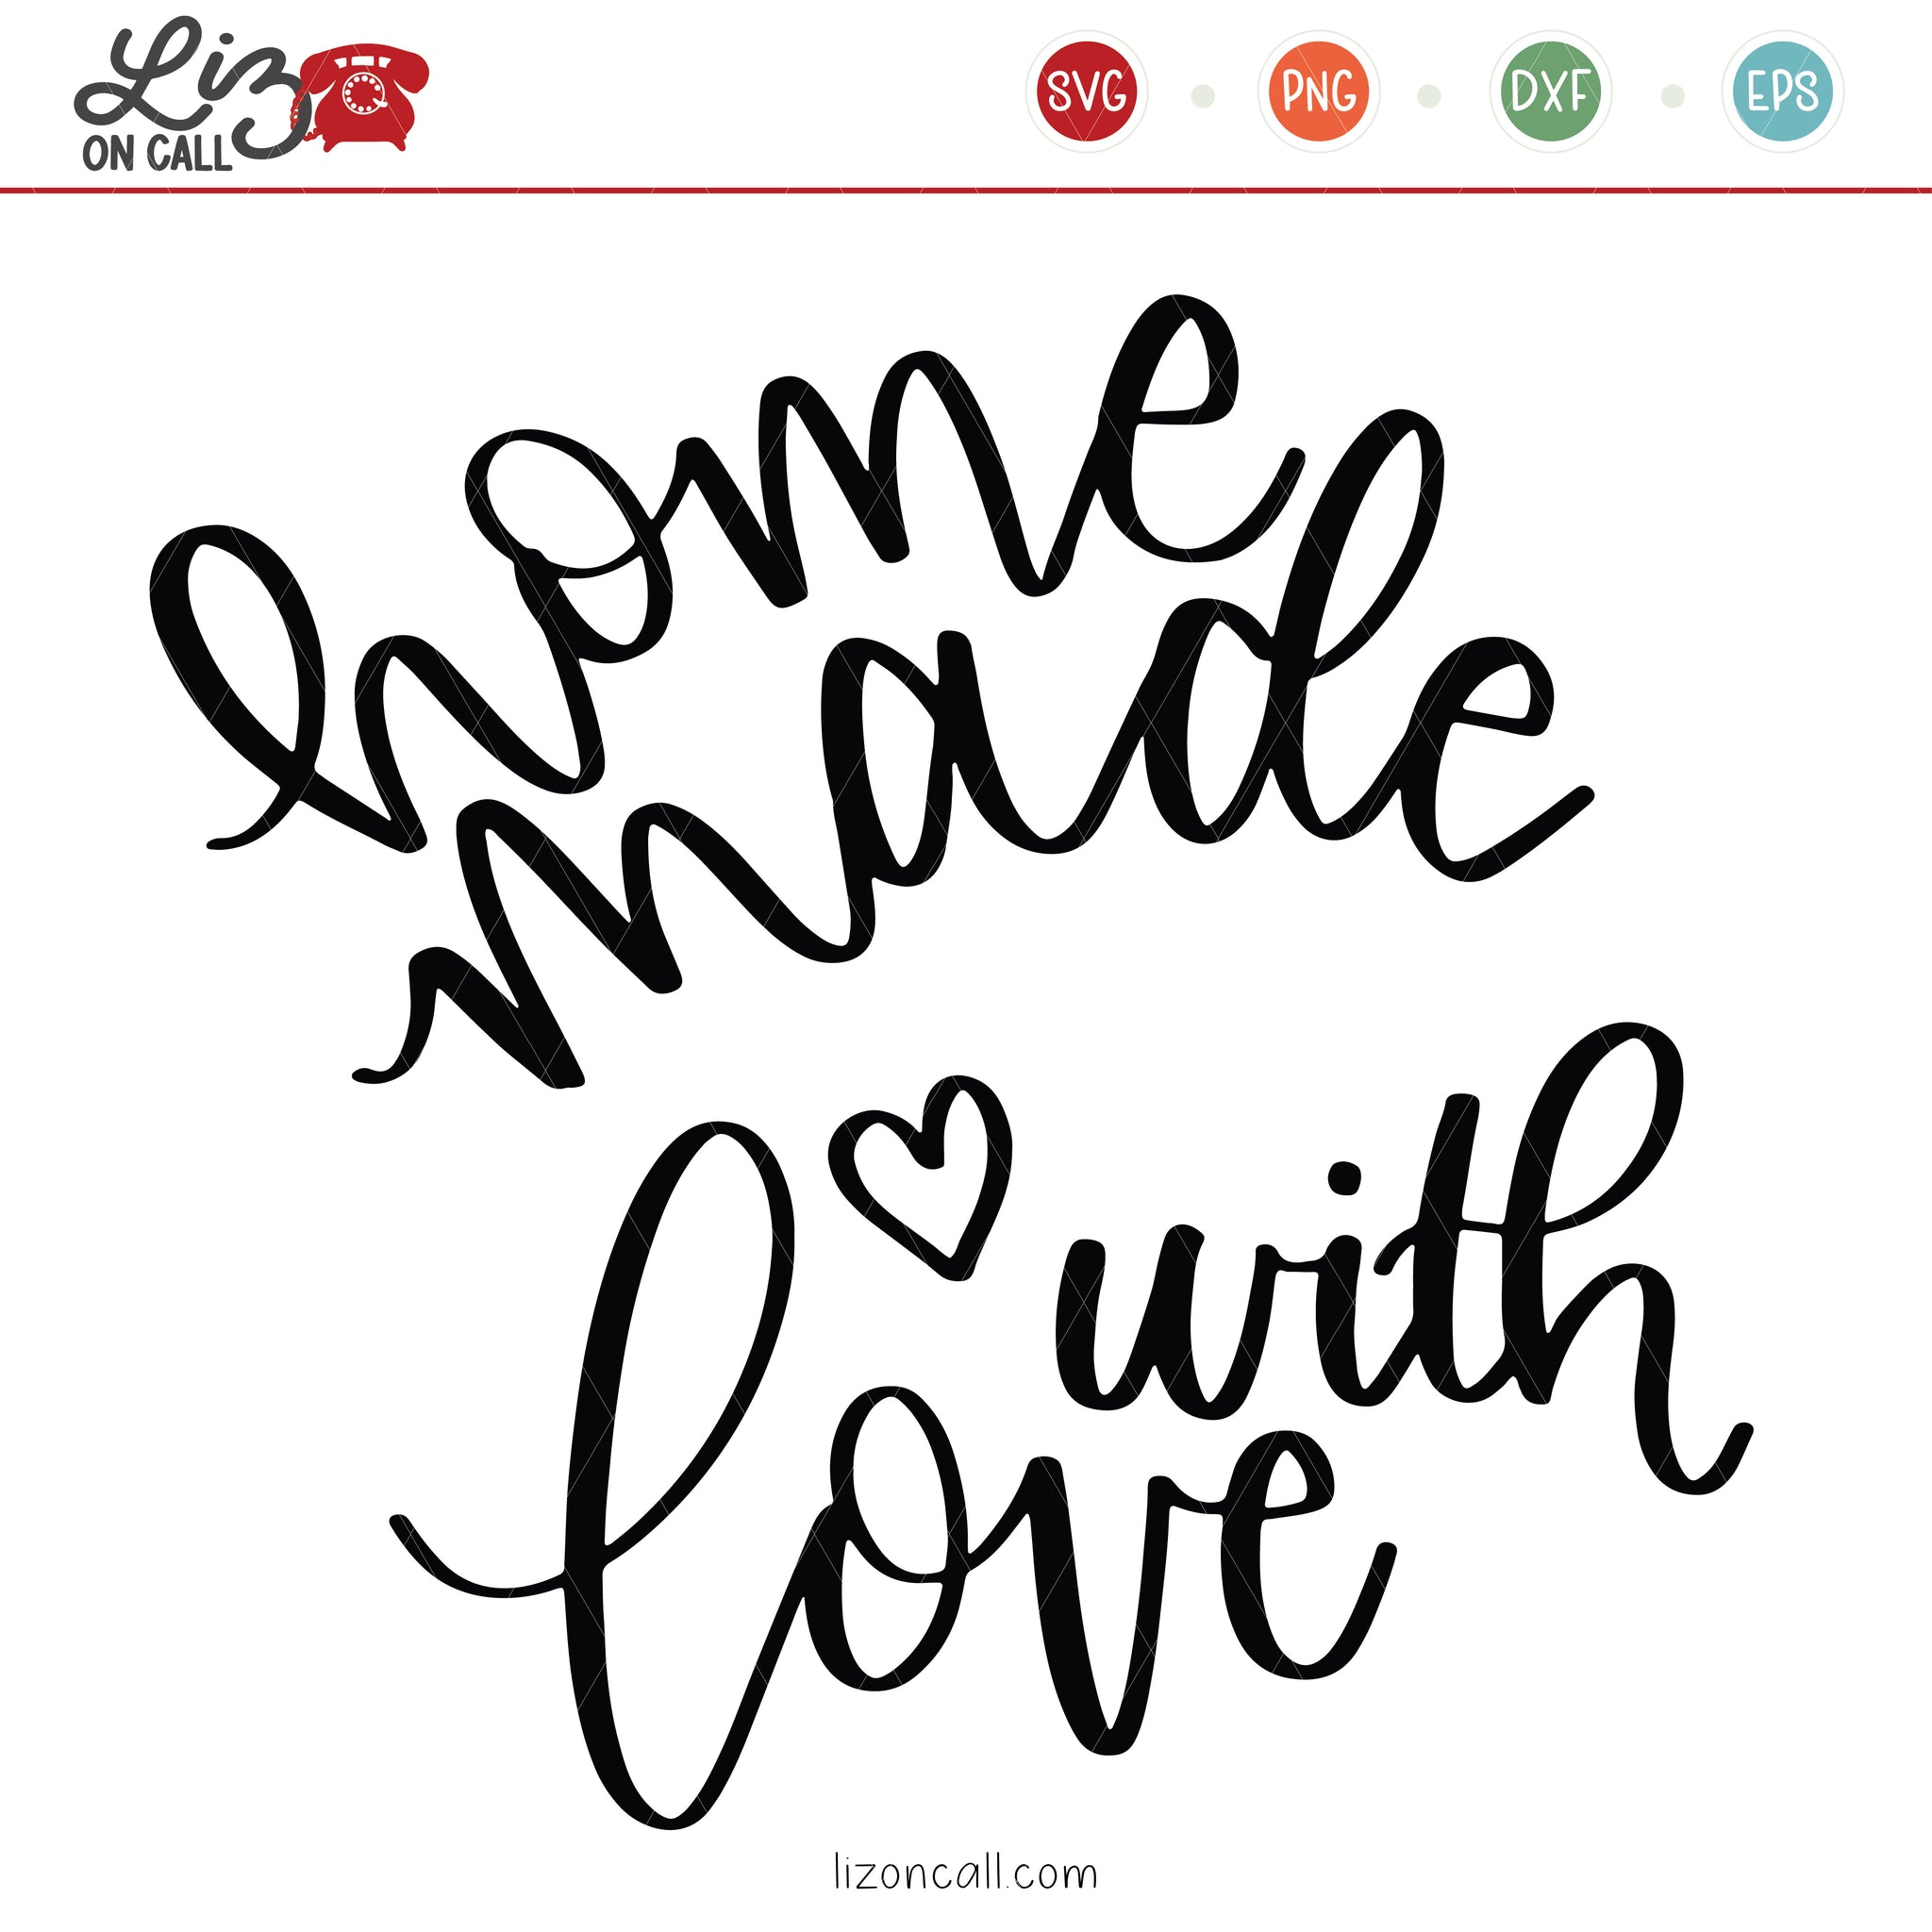 Homemade with Love SVG Files